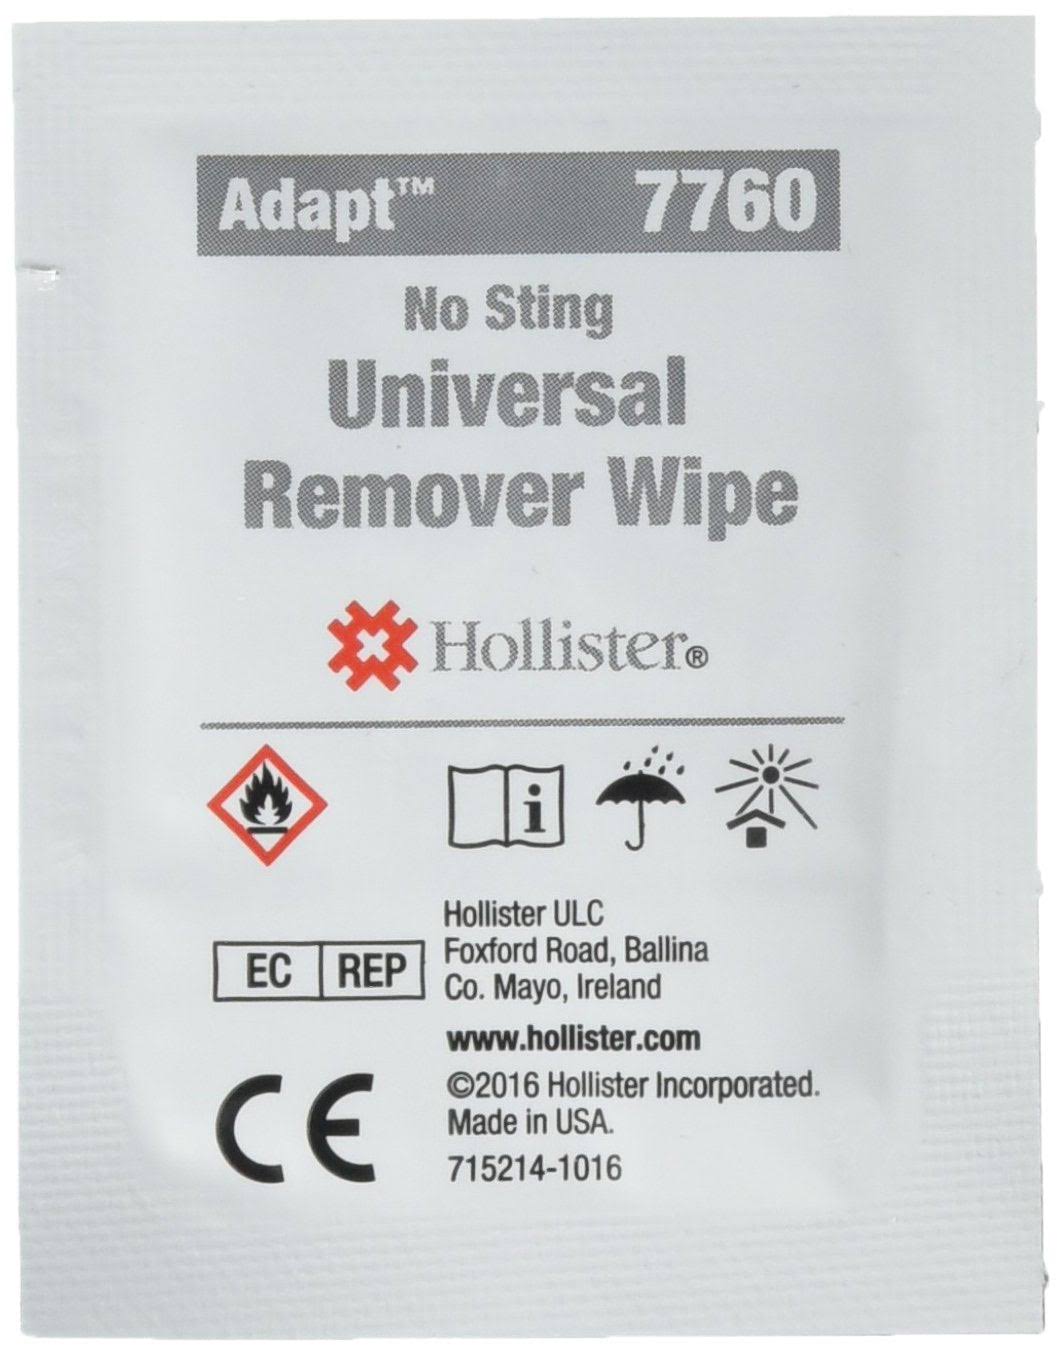 Hollister Adhesive and Barrier Remover Wipes - 50ct